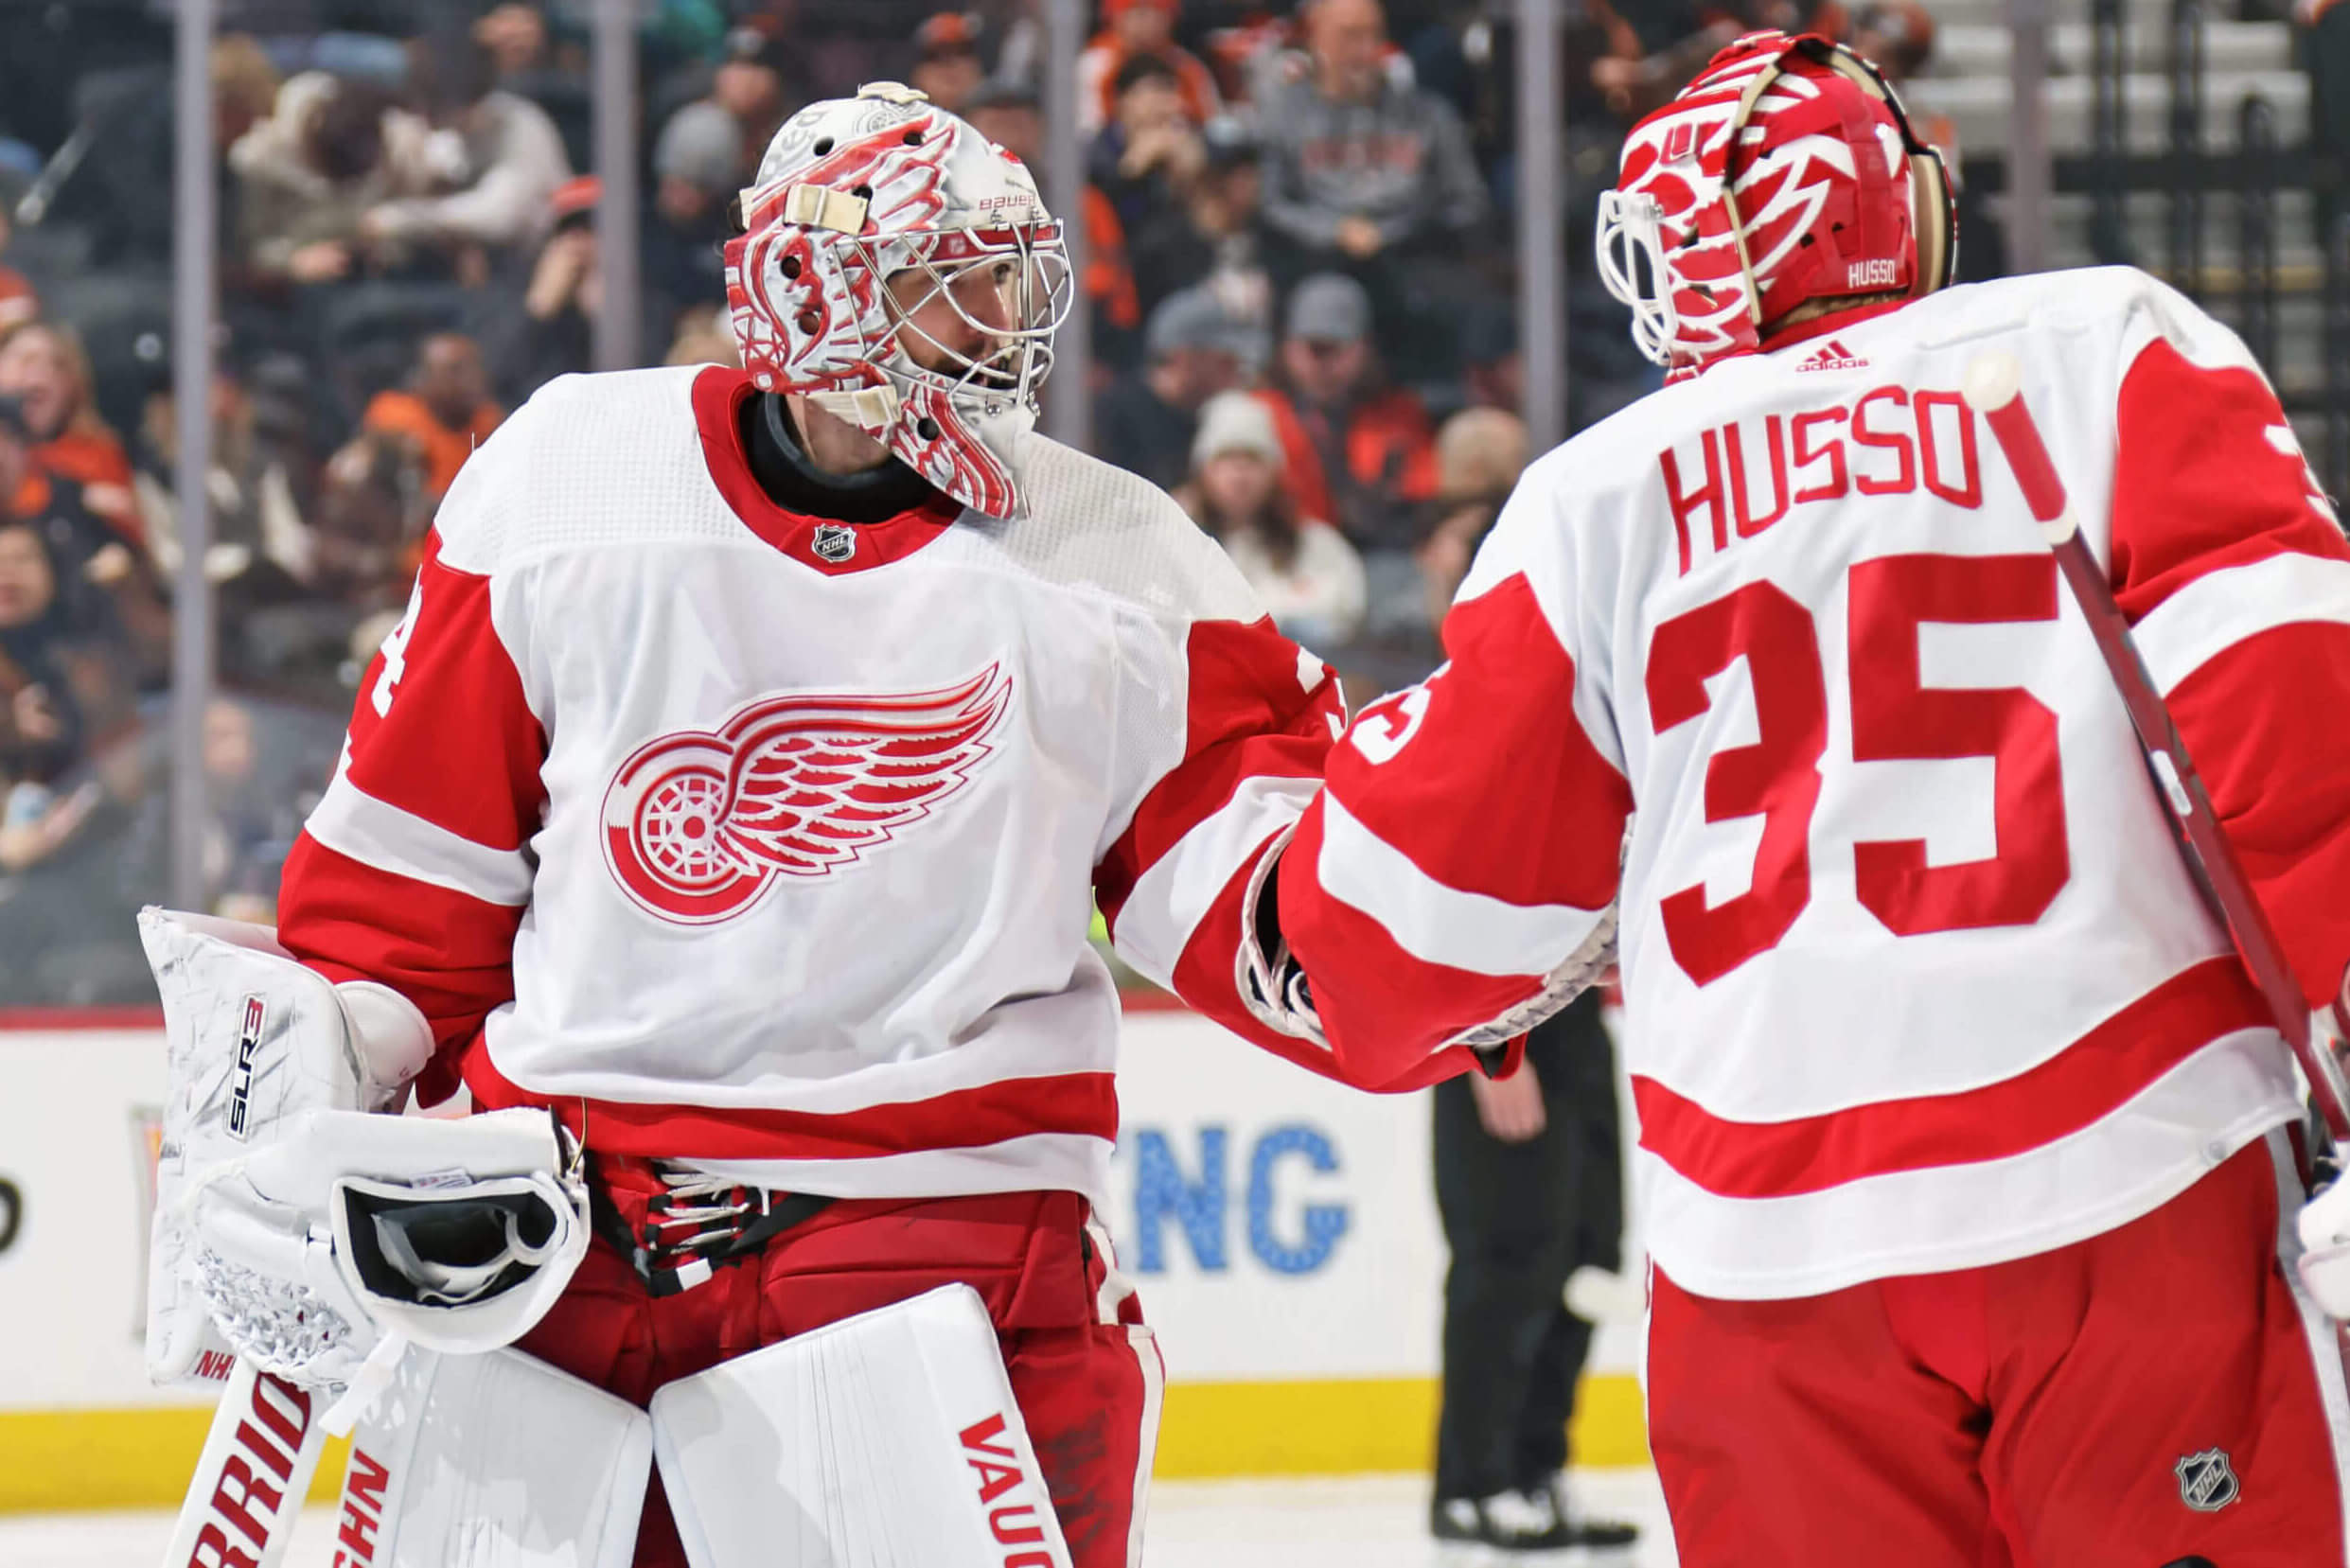 What a fascinating NHL goalie market means for Red Wings this summer